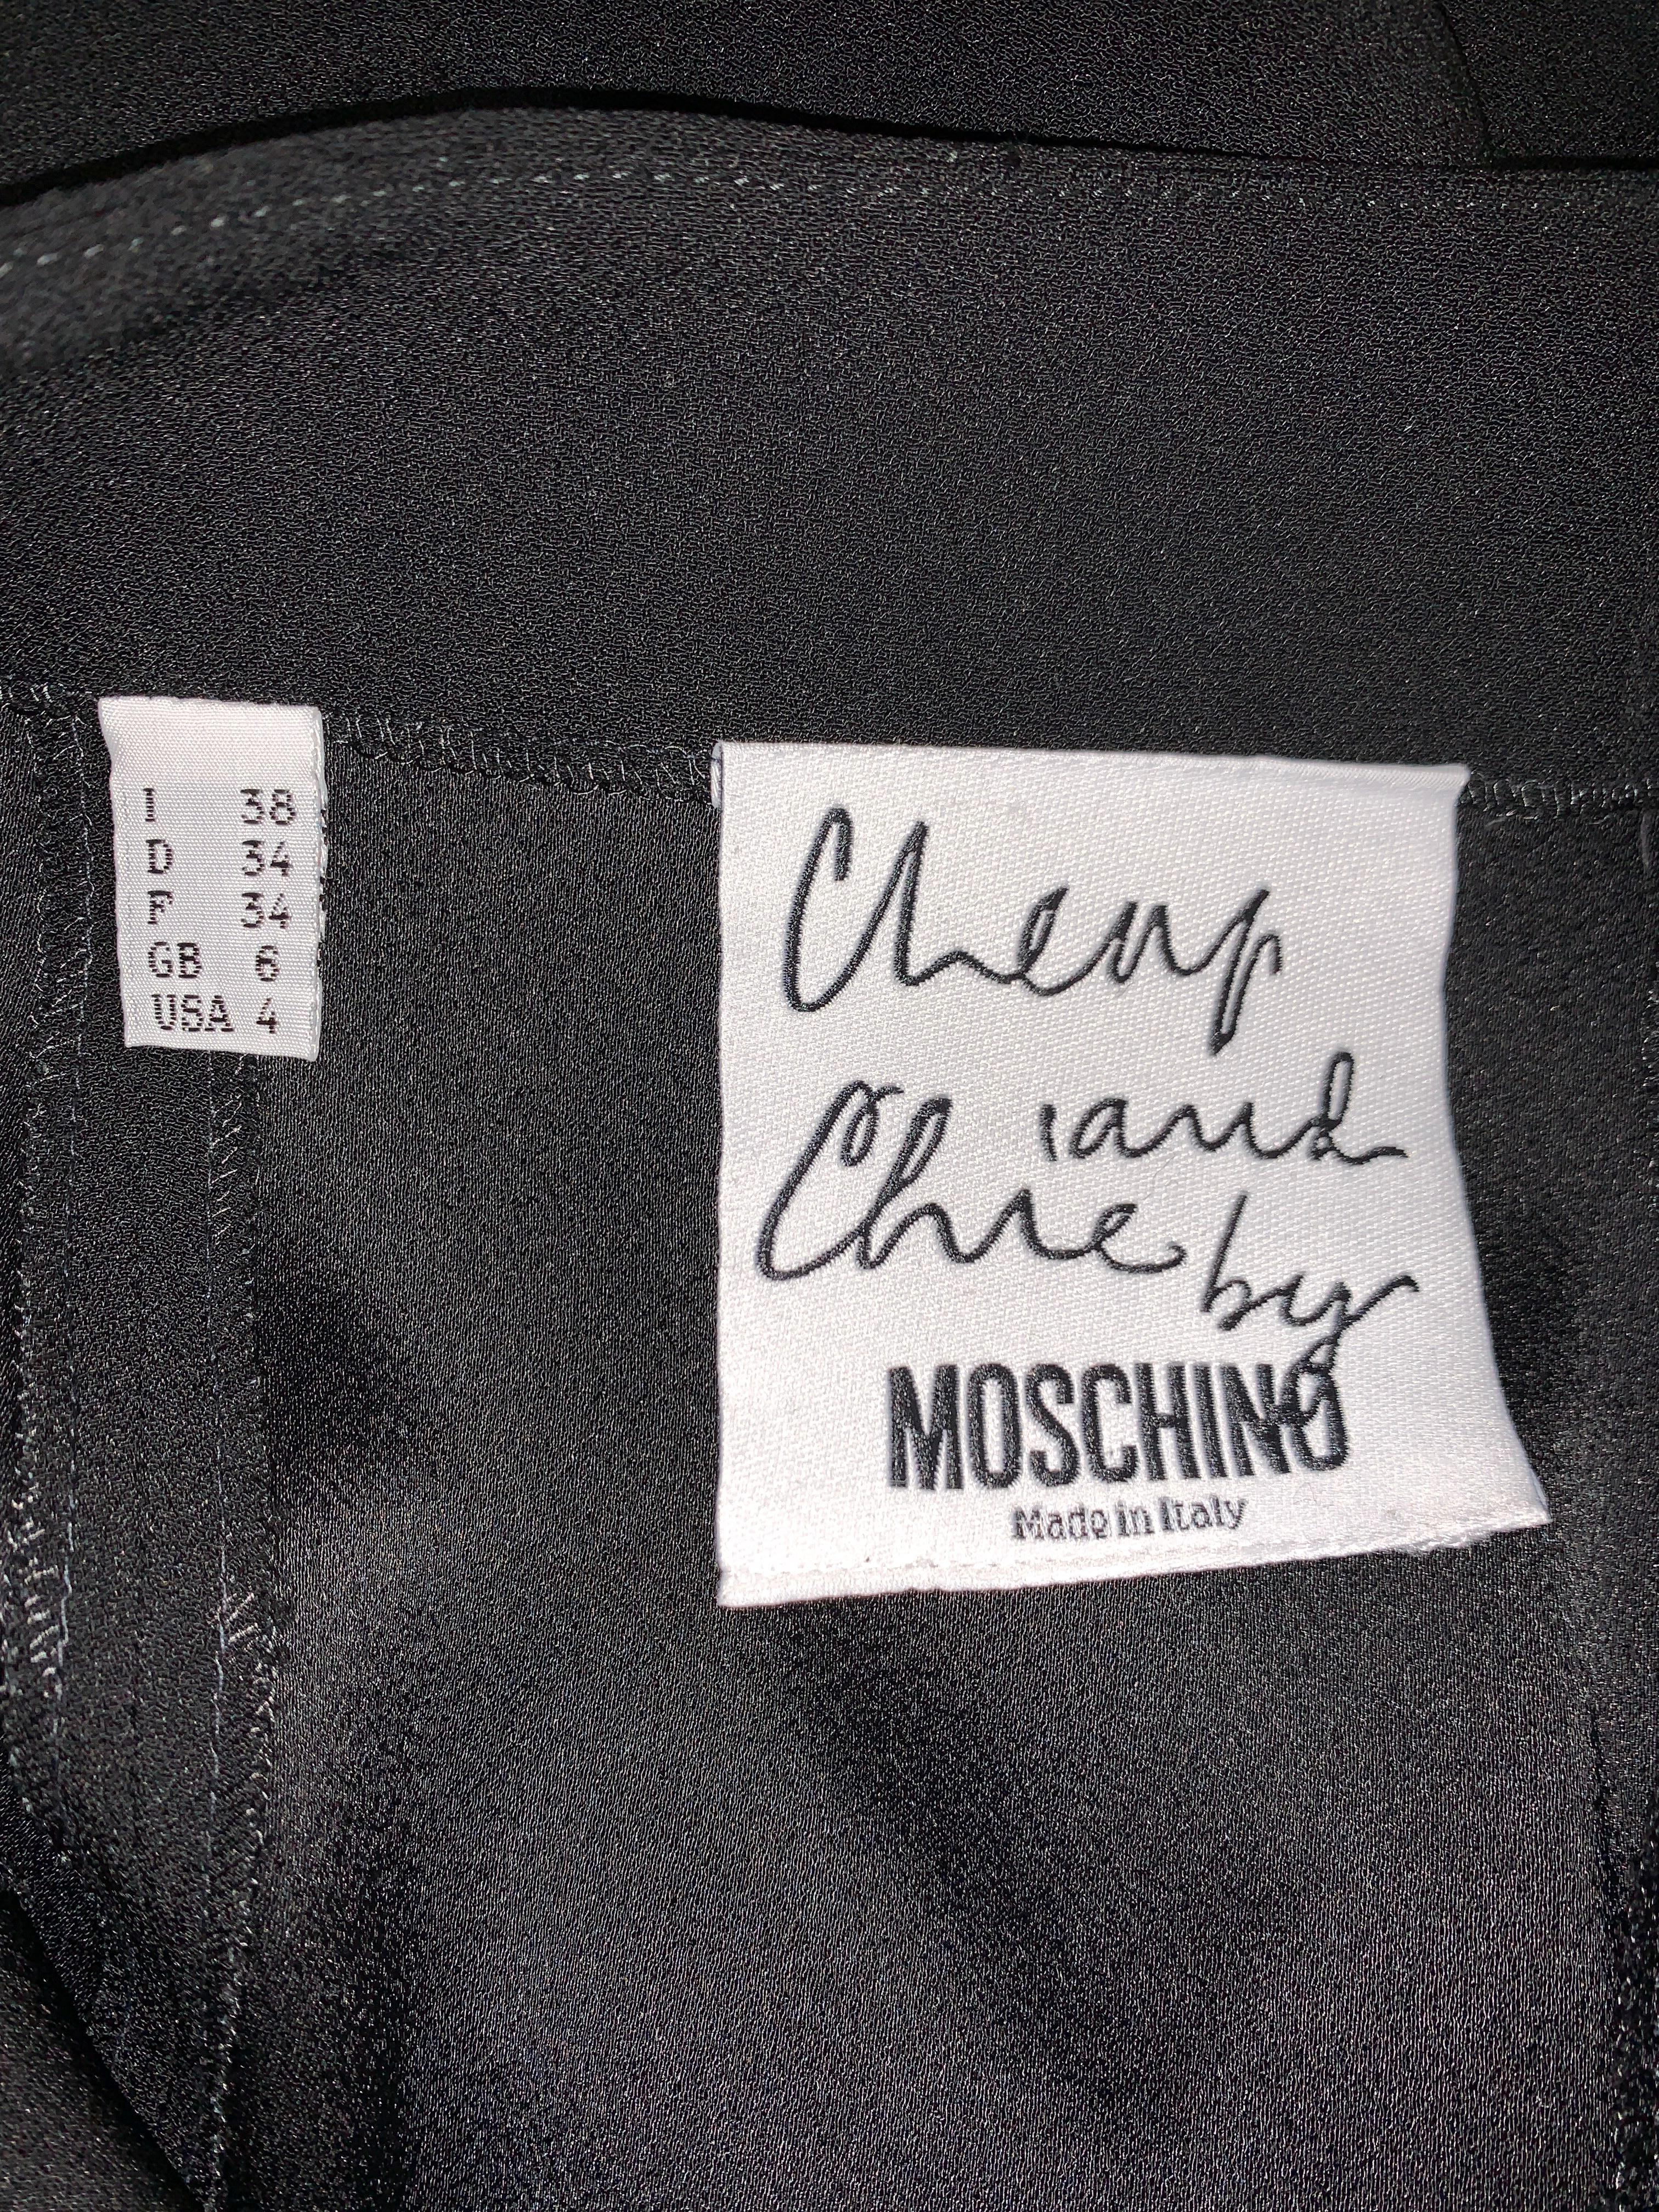 Vintage Moschino Cheap & Chic Black Lace Up Detail Maxi Skirt 1990s In Excellent Condition For Sale In San Francisco, CA